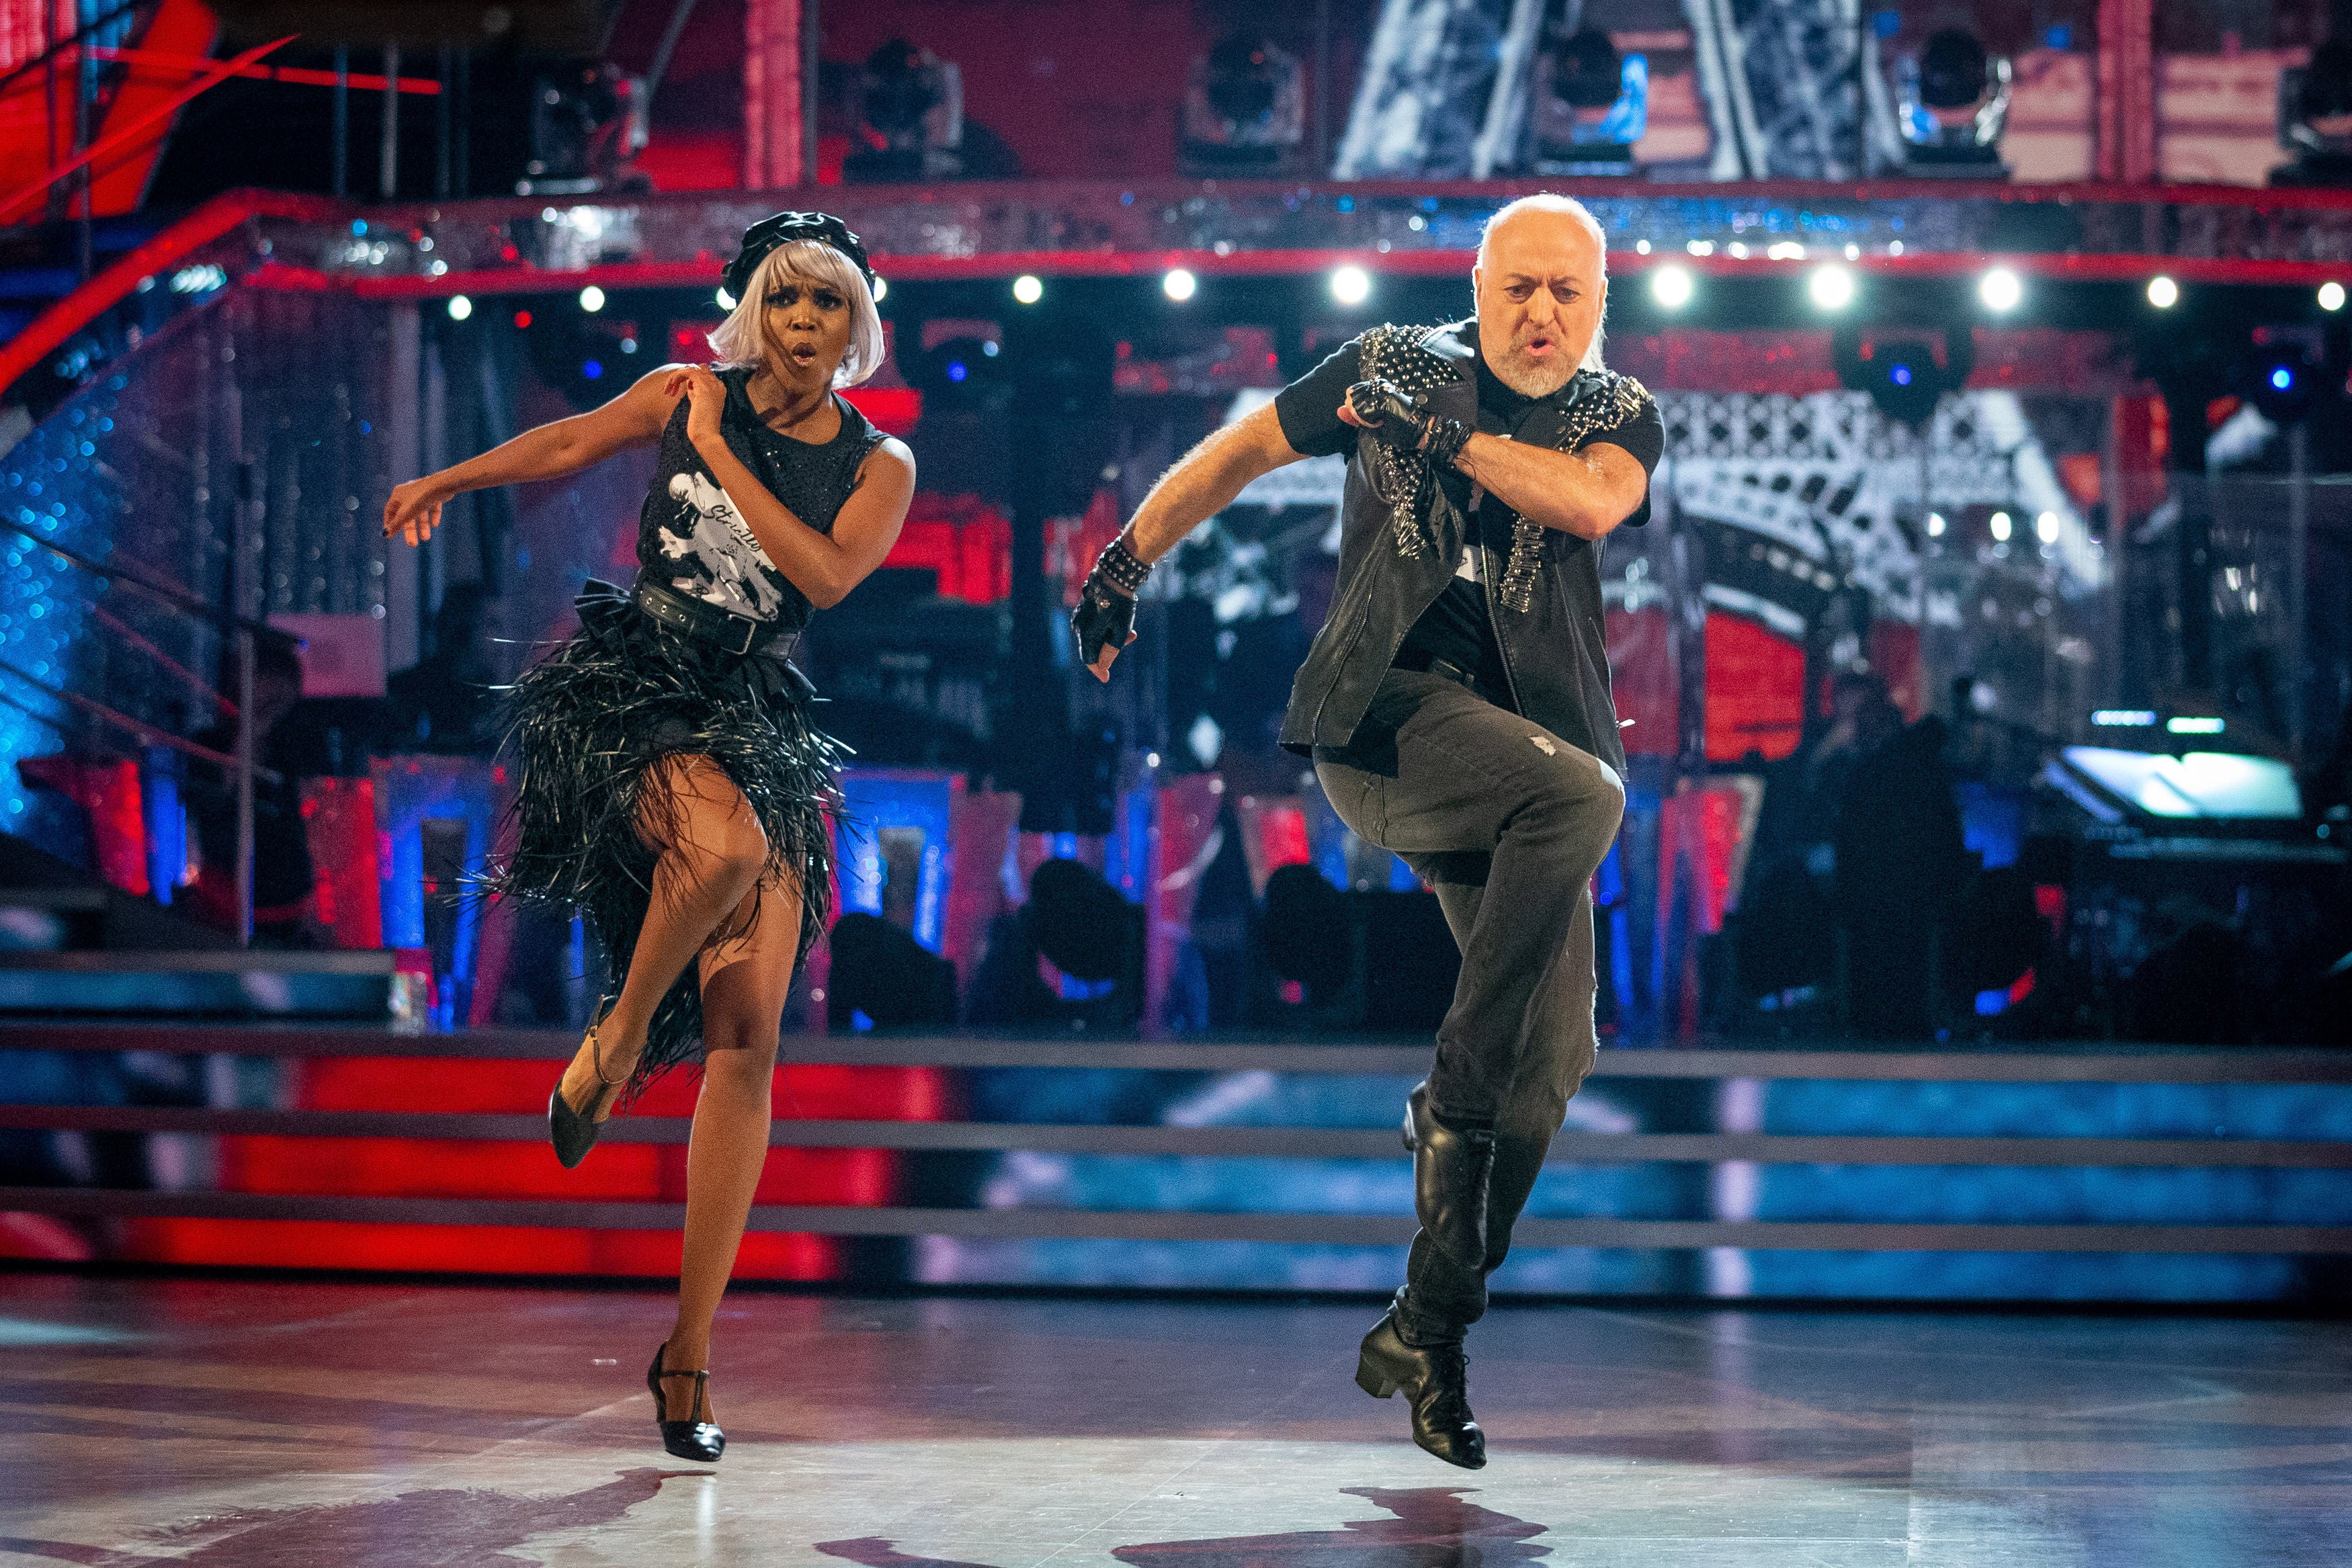 Saturday night fever: Oti Mabuse and Bill Bailey are a must-see combo